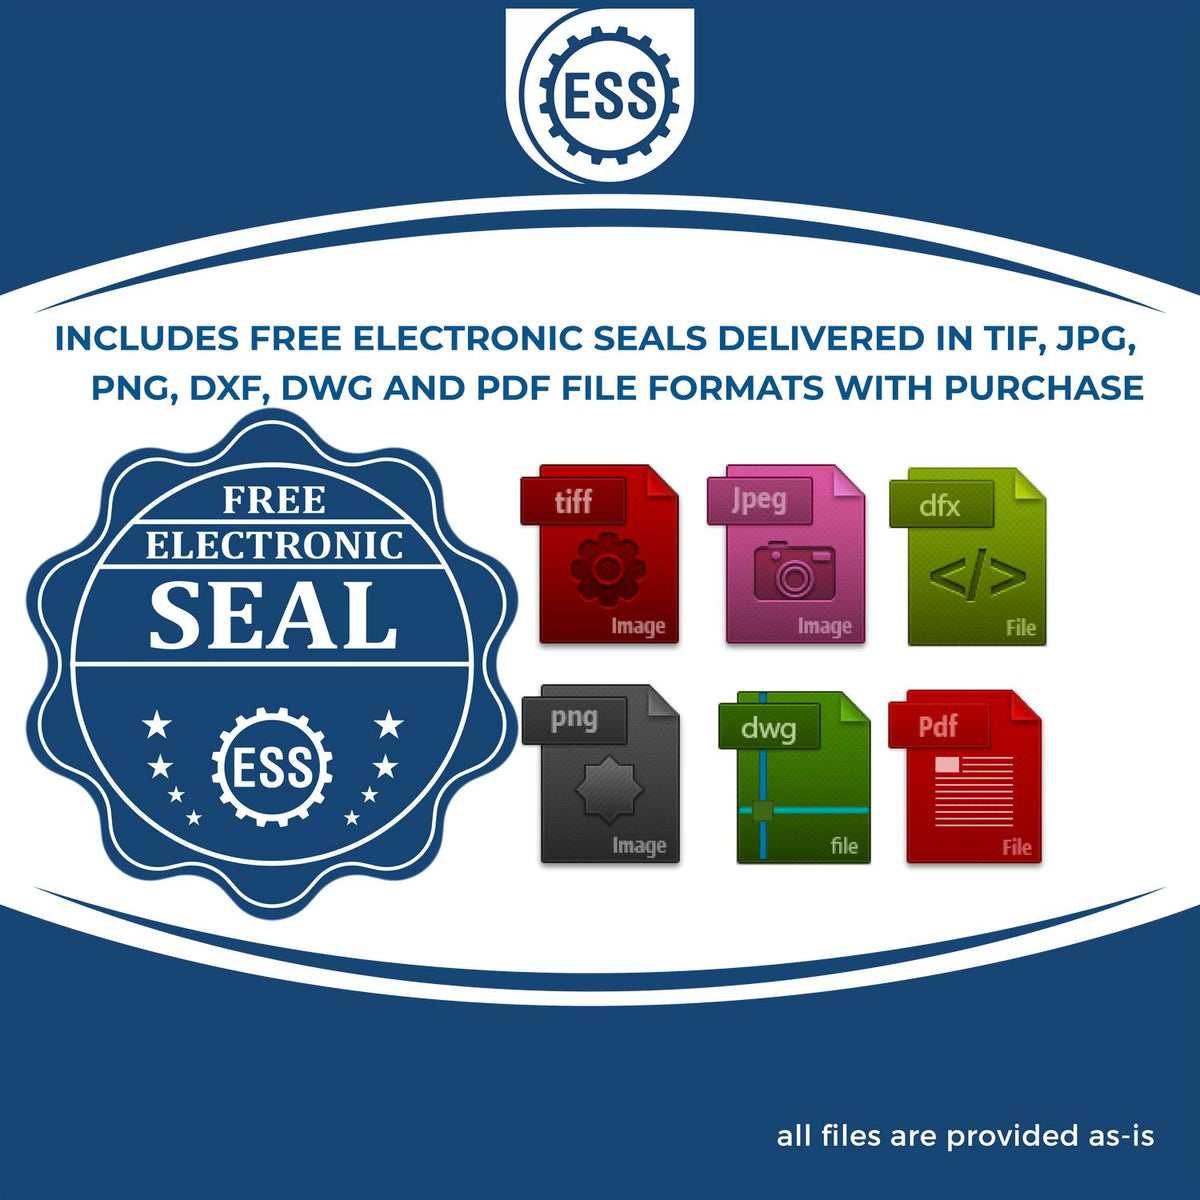 An infographic for the free electronic seal for the MaxLight Premium Pre-Inked Arkansas Rectangular Notarial Stamp illustrating the different file type icons such as DXF, DWG, TIF, JPG and PNG.